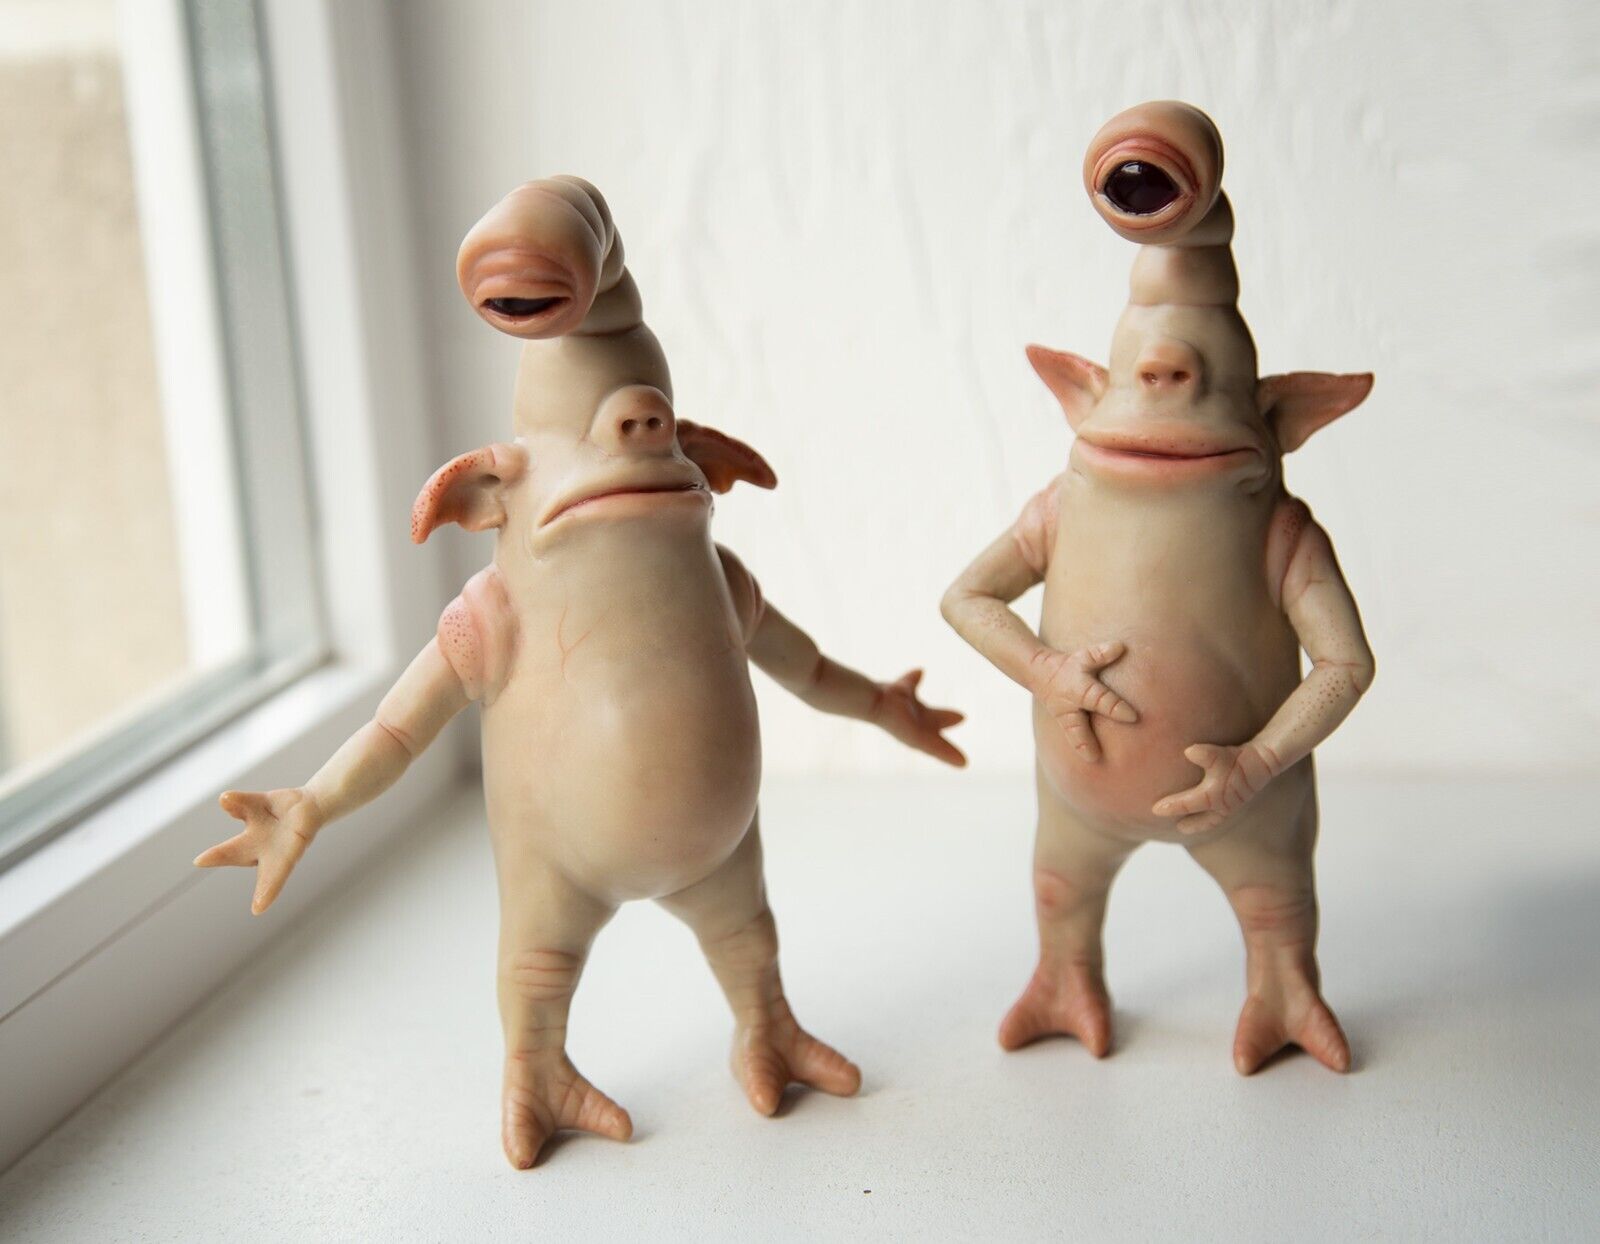 Pair of cyclops-goblins funny brothers, sad and happy weird ooak cyclops goblins